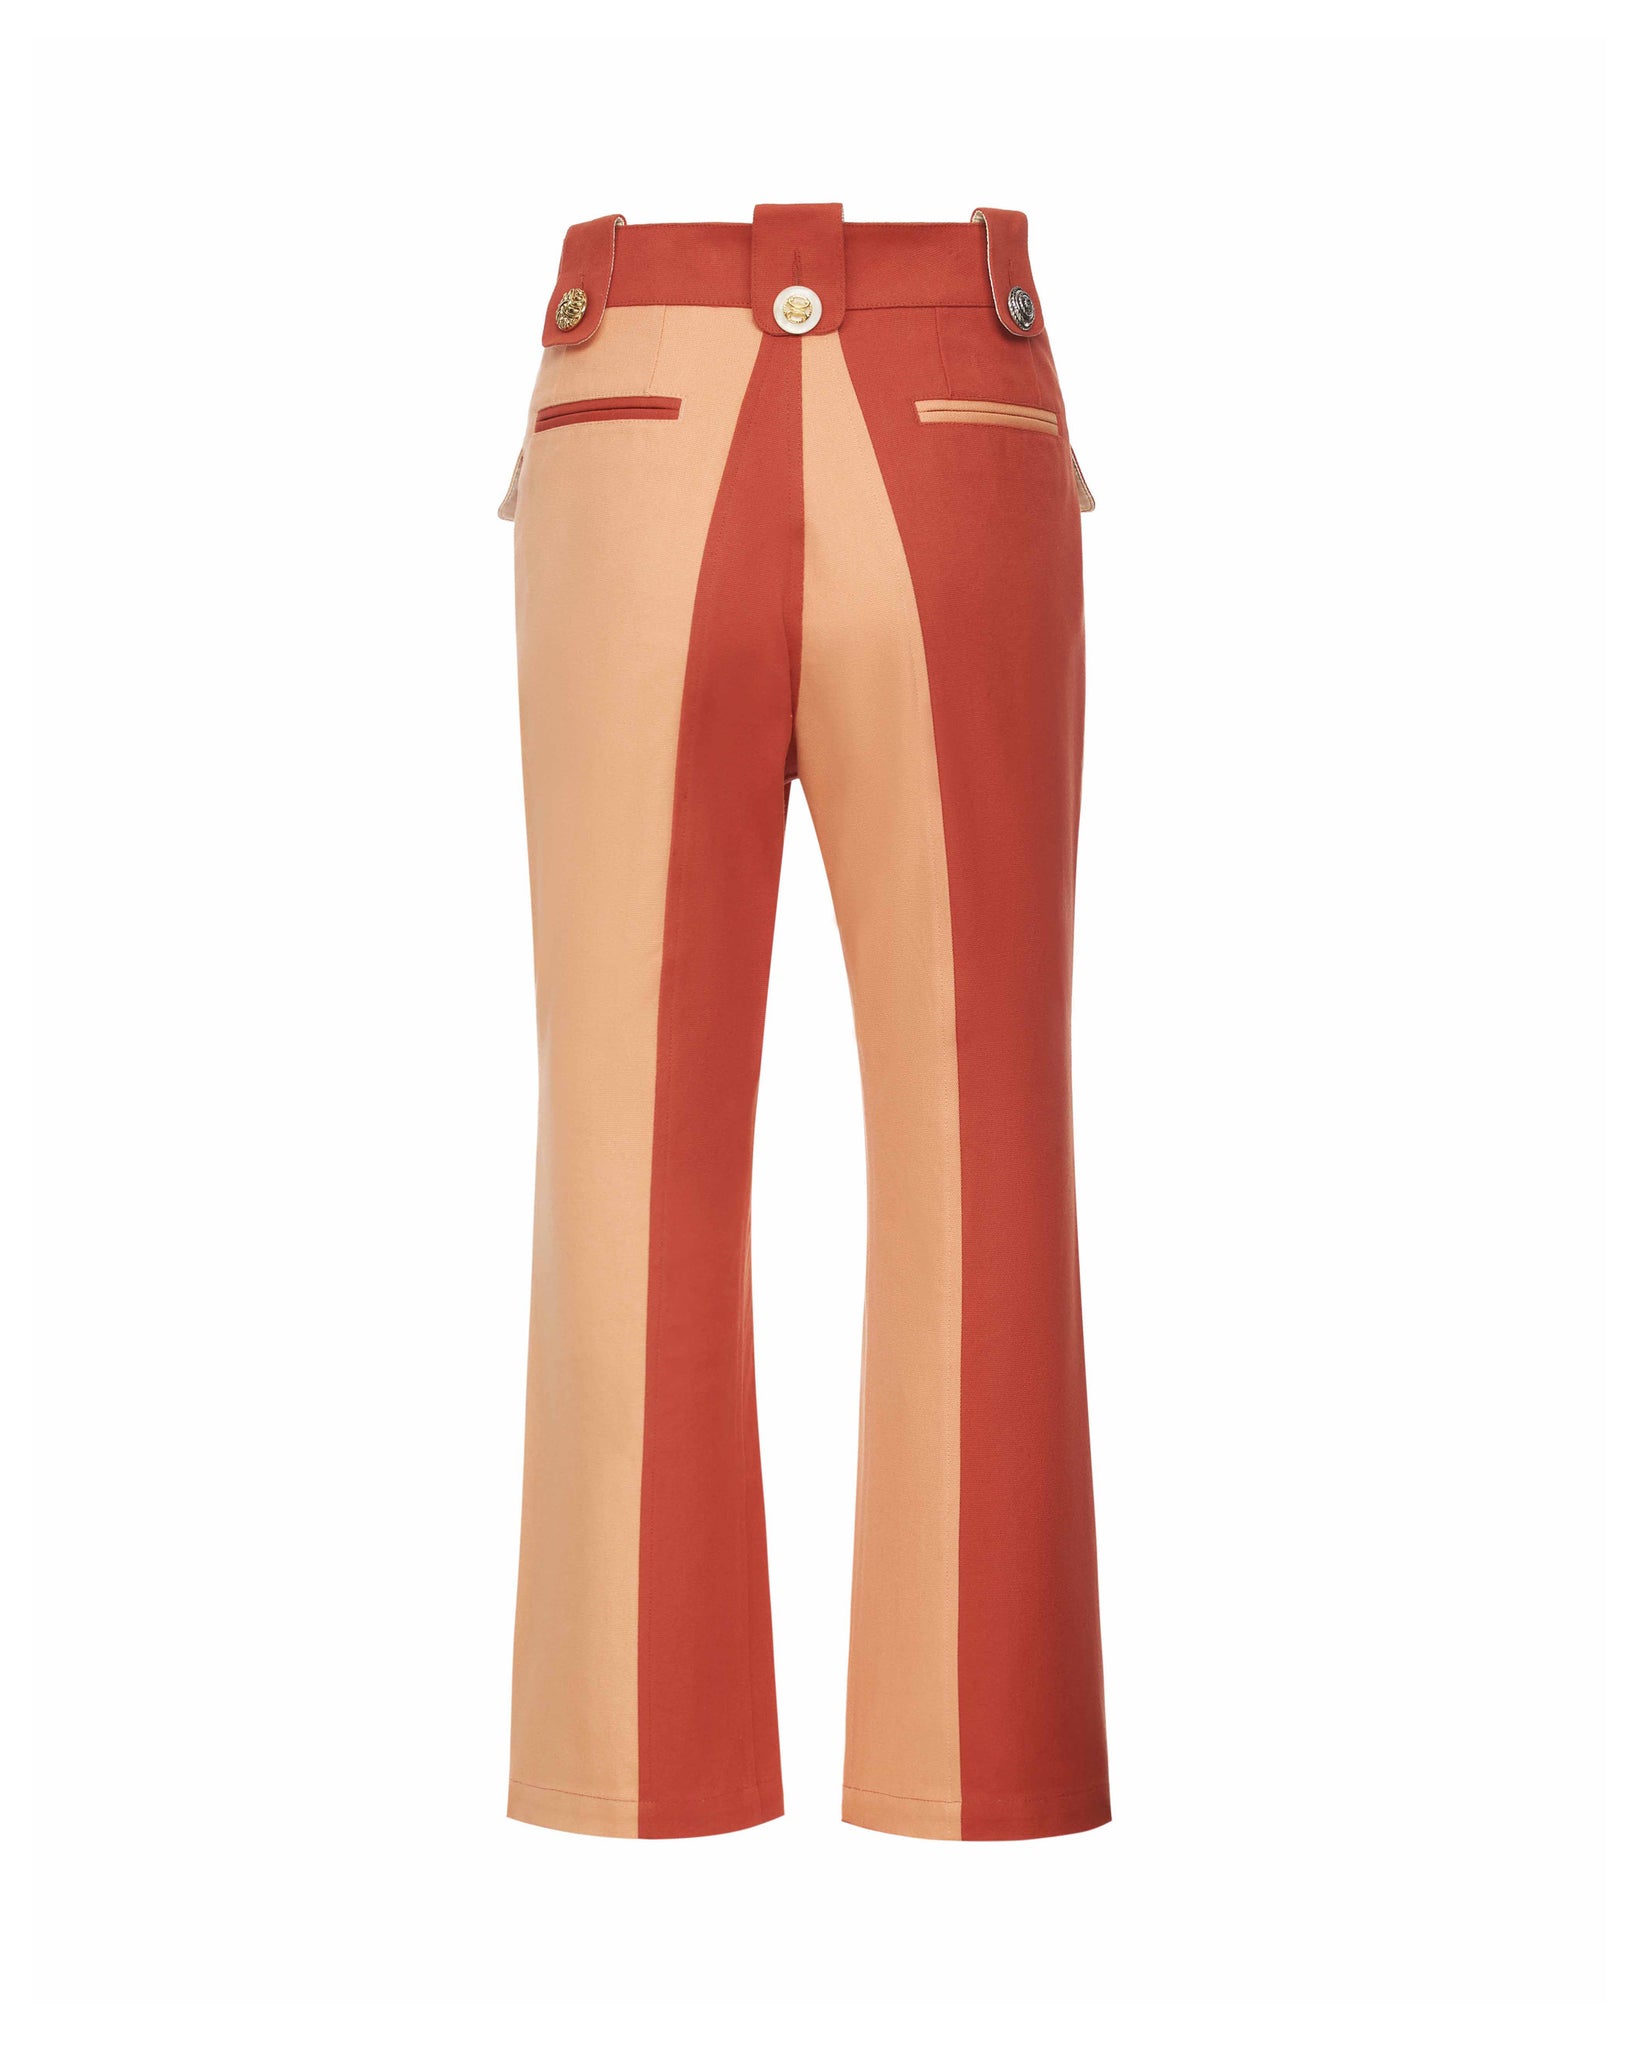 Load image into Gallery viewer, Big Girl Pants (Caramel)
